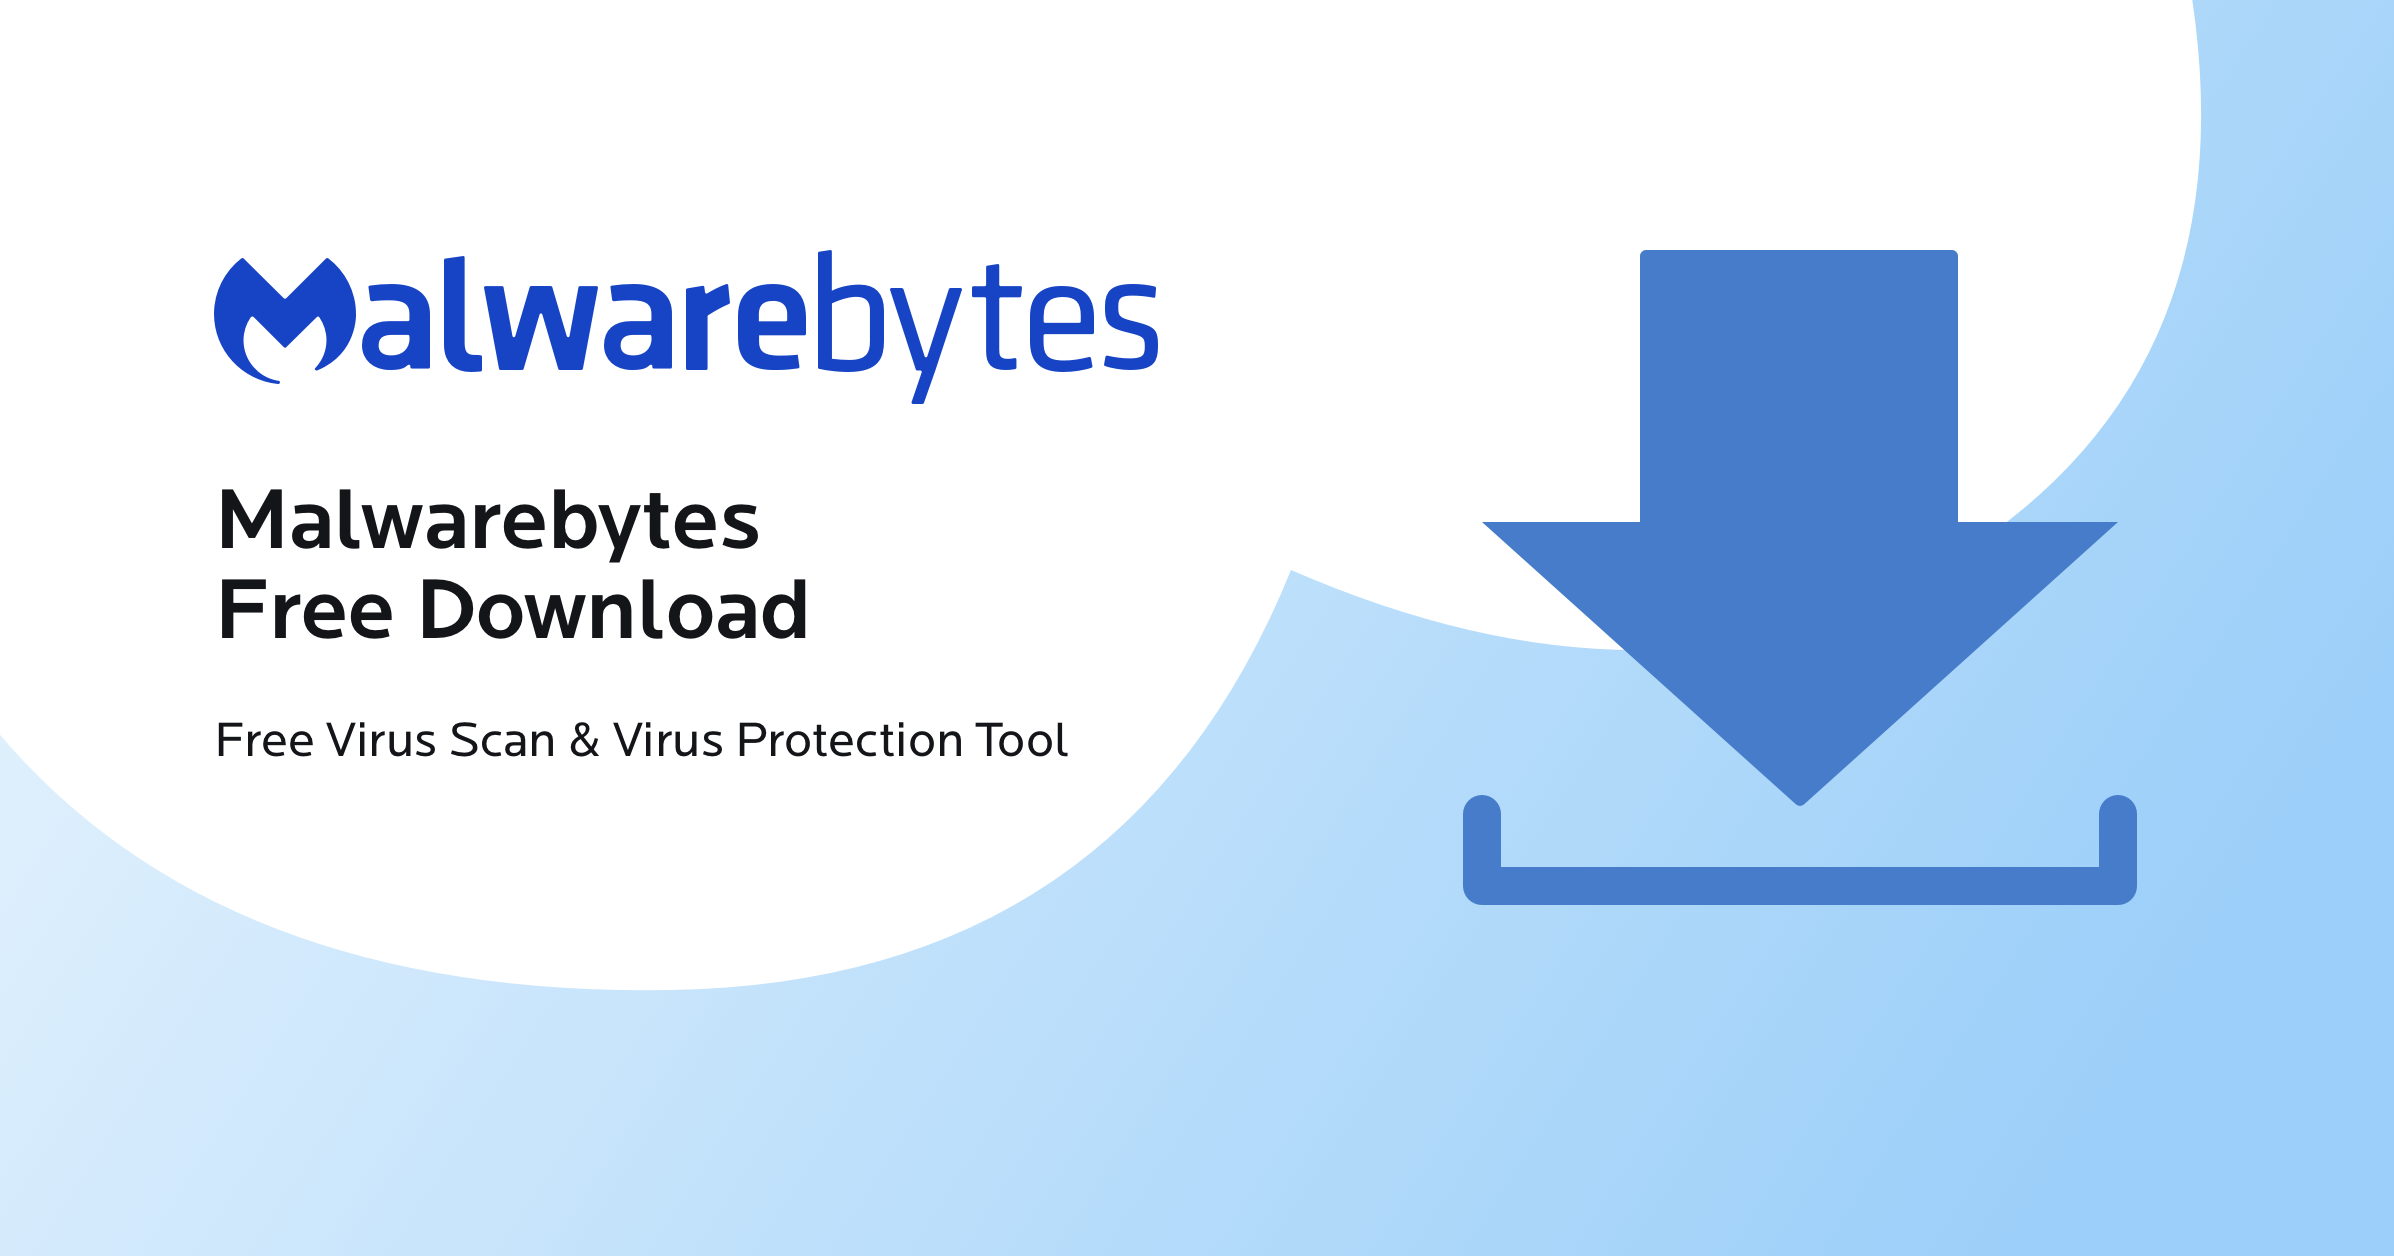 Antivirus software: Install a reputable antivirus program and run a full system scan to detect and remove any malware or viruses that may be causing issues with btdownloadgui.exe.
Malware removal tool: Utilize a specialized malware removal tool, such as Malwarebytes, to thoroughly scan your system and eliminate any malicious software related to btdownloadgui.exe.